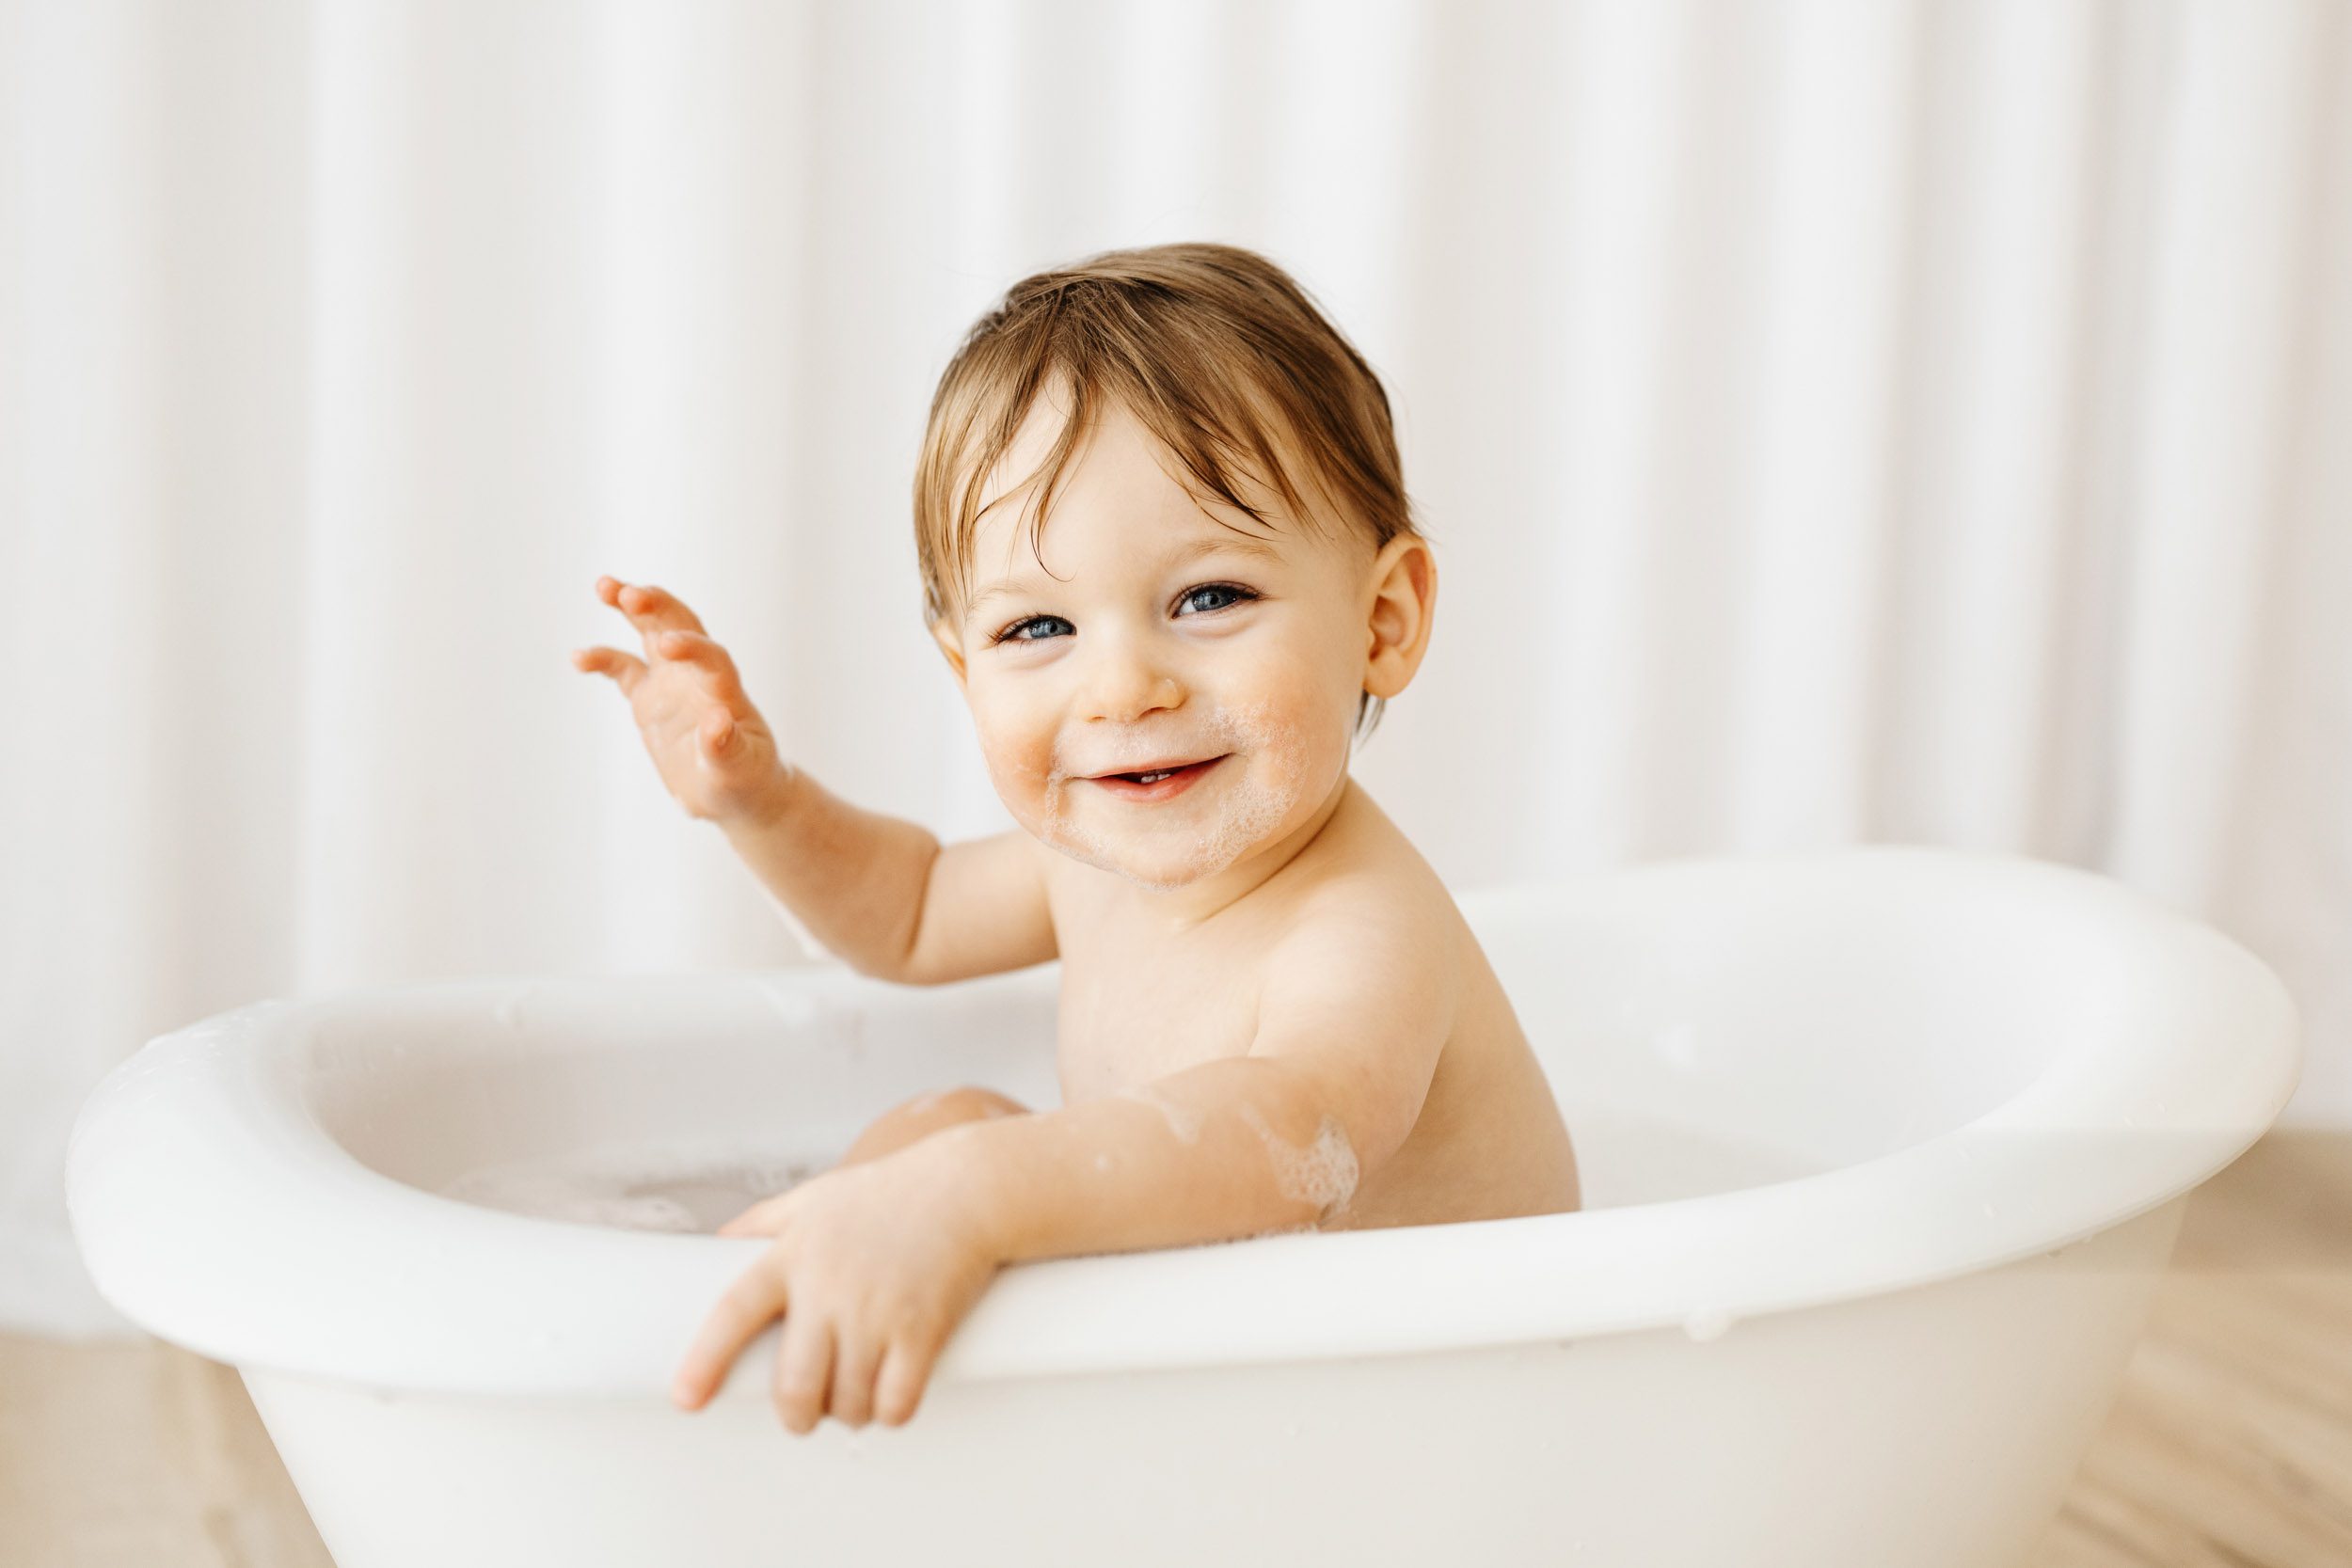 a young boy splashing in a little bathtub and looking right at the camera with a huge smile on his face during a 1st birthday cake smash & splash photoshoot